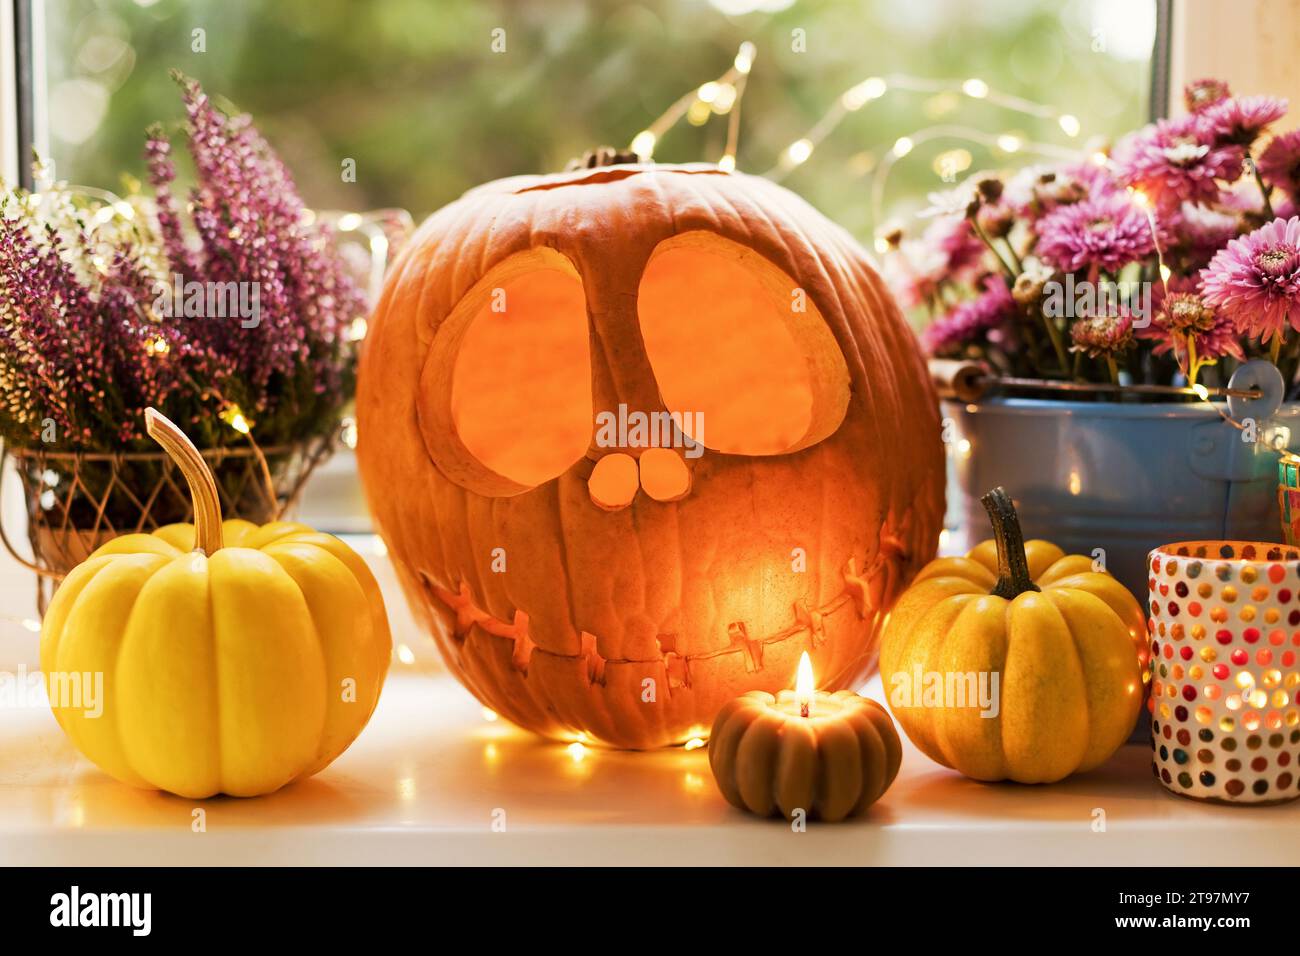 Halloween decoration of Jack O' Lantern with pumpkins and flowers near candle on window sill Stock Photo